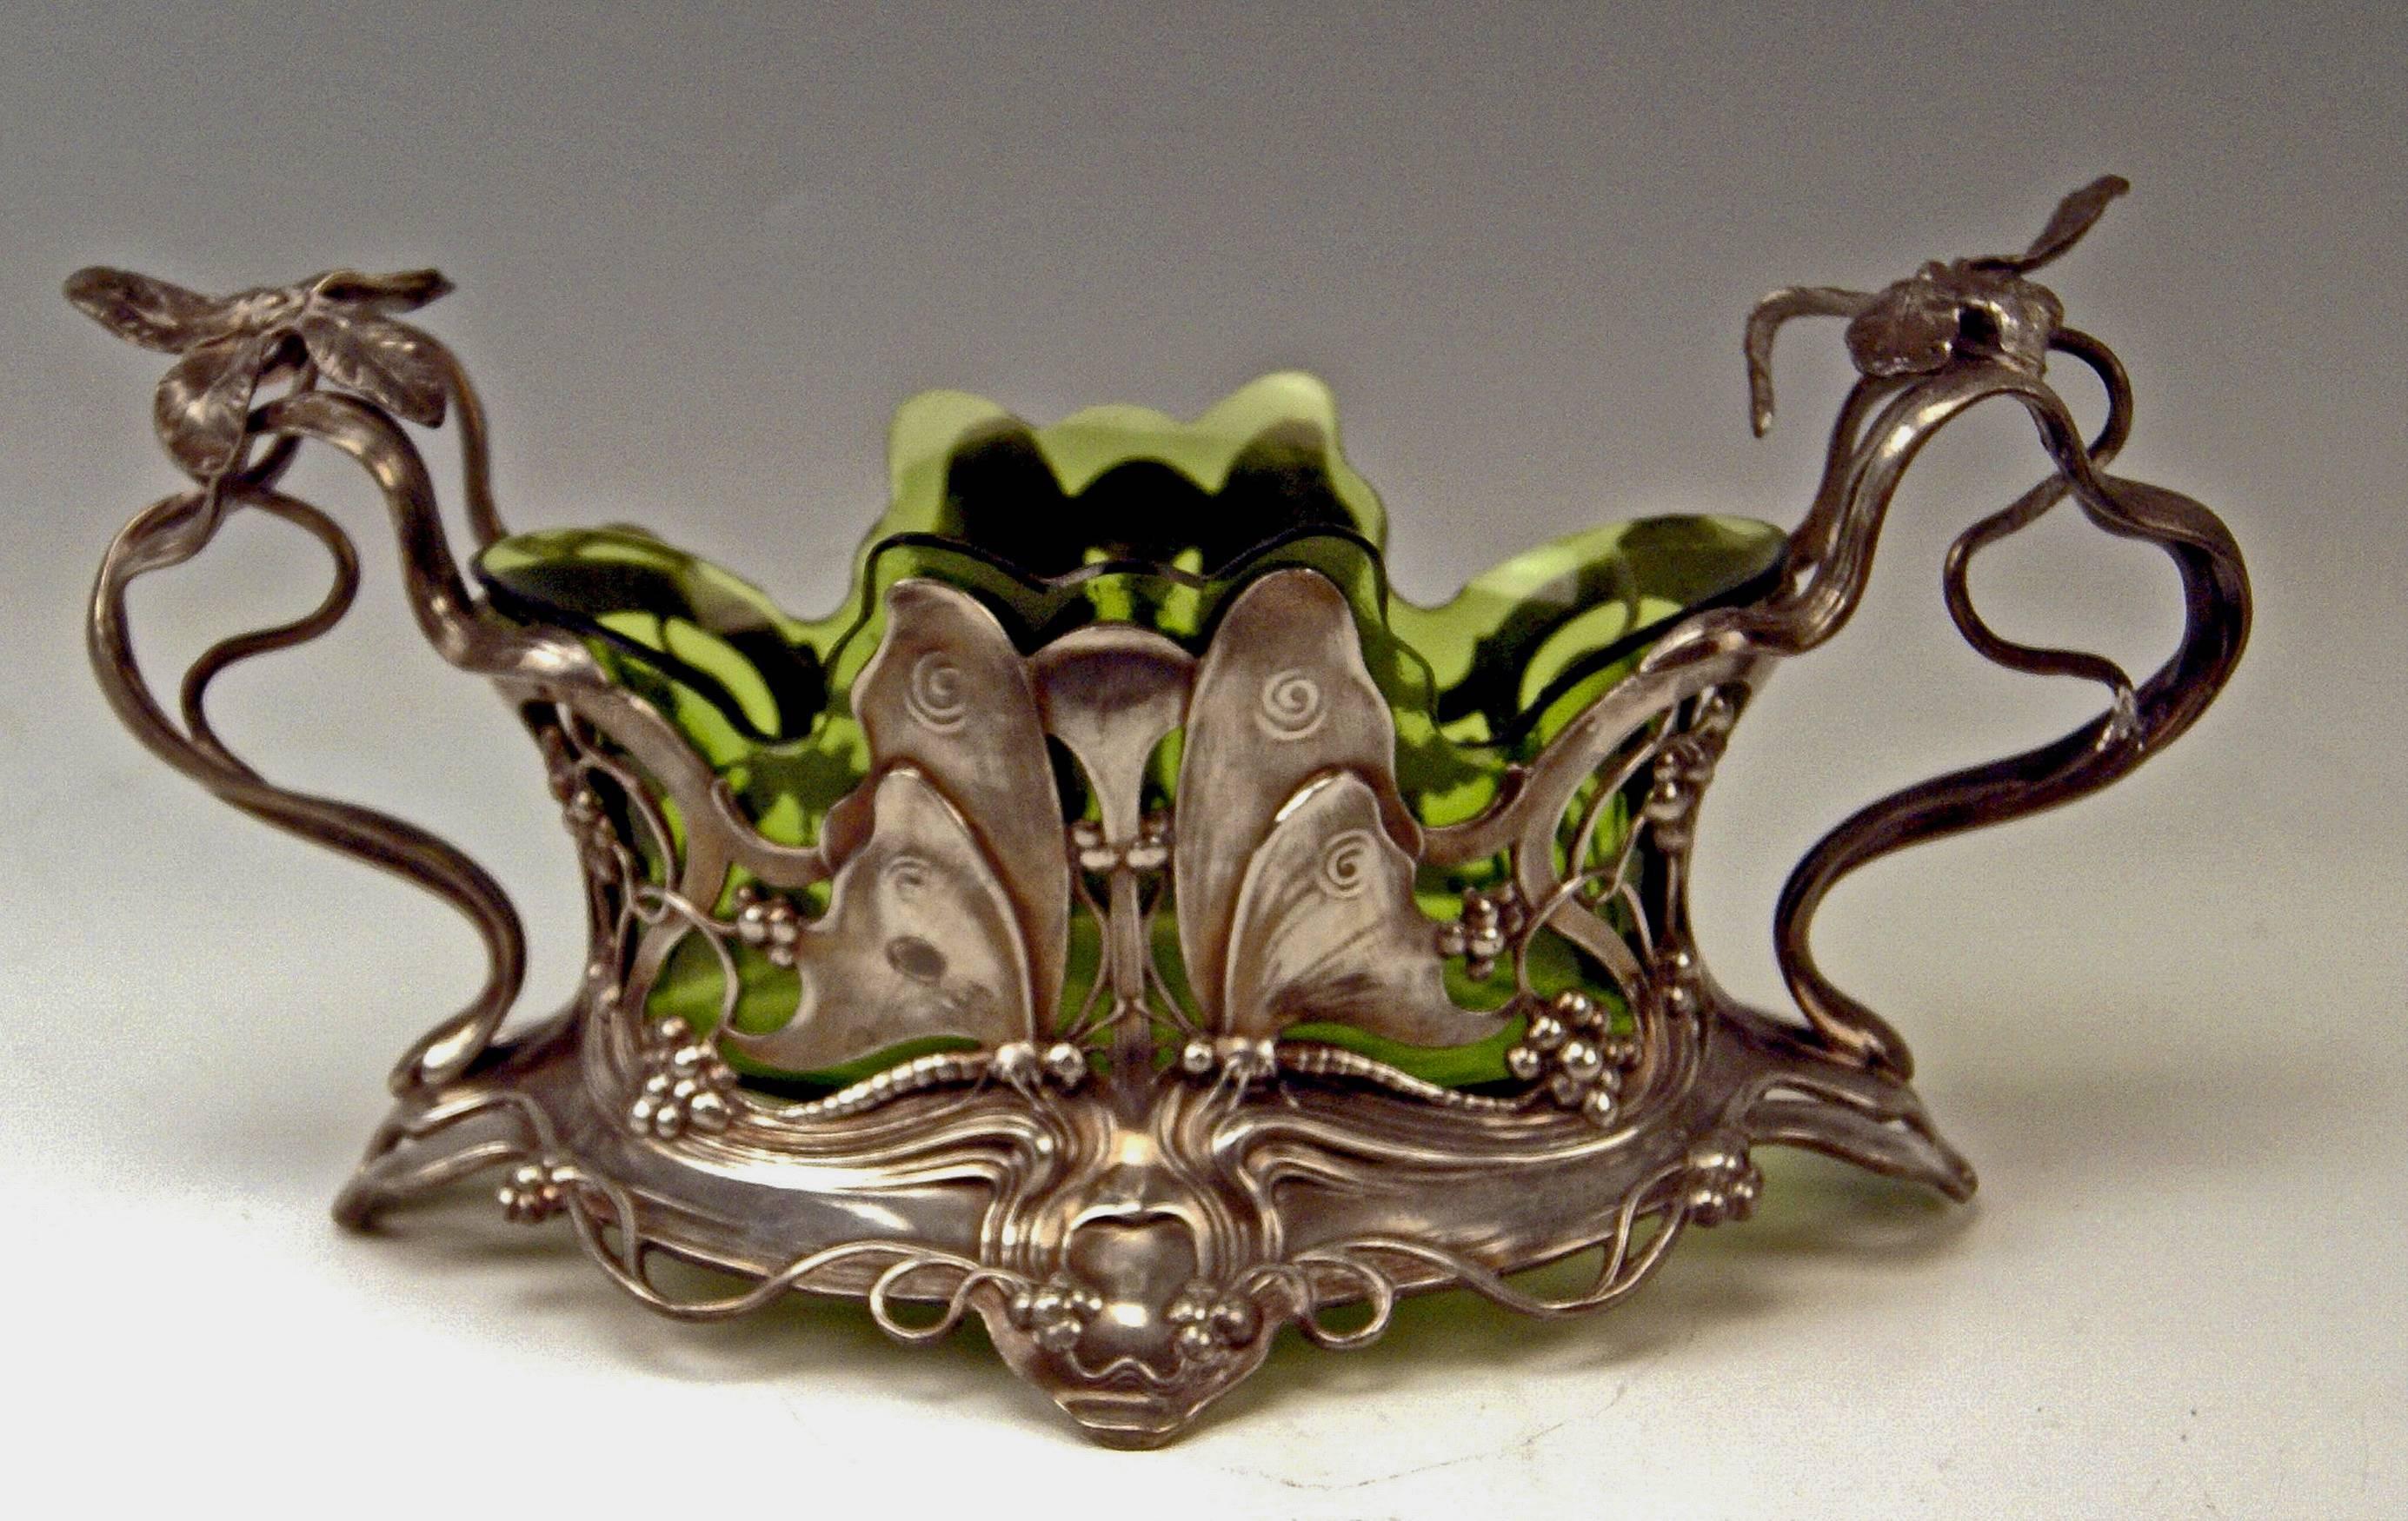 Superb WMF Art Nouveau flower dish/jardiniére (silver plated) with original glass liner.
The silver plated part of flower dish is decorated with most elegant Art Nouveau ornaments of floral type (bowl's wall is stunningly worked in reticulated